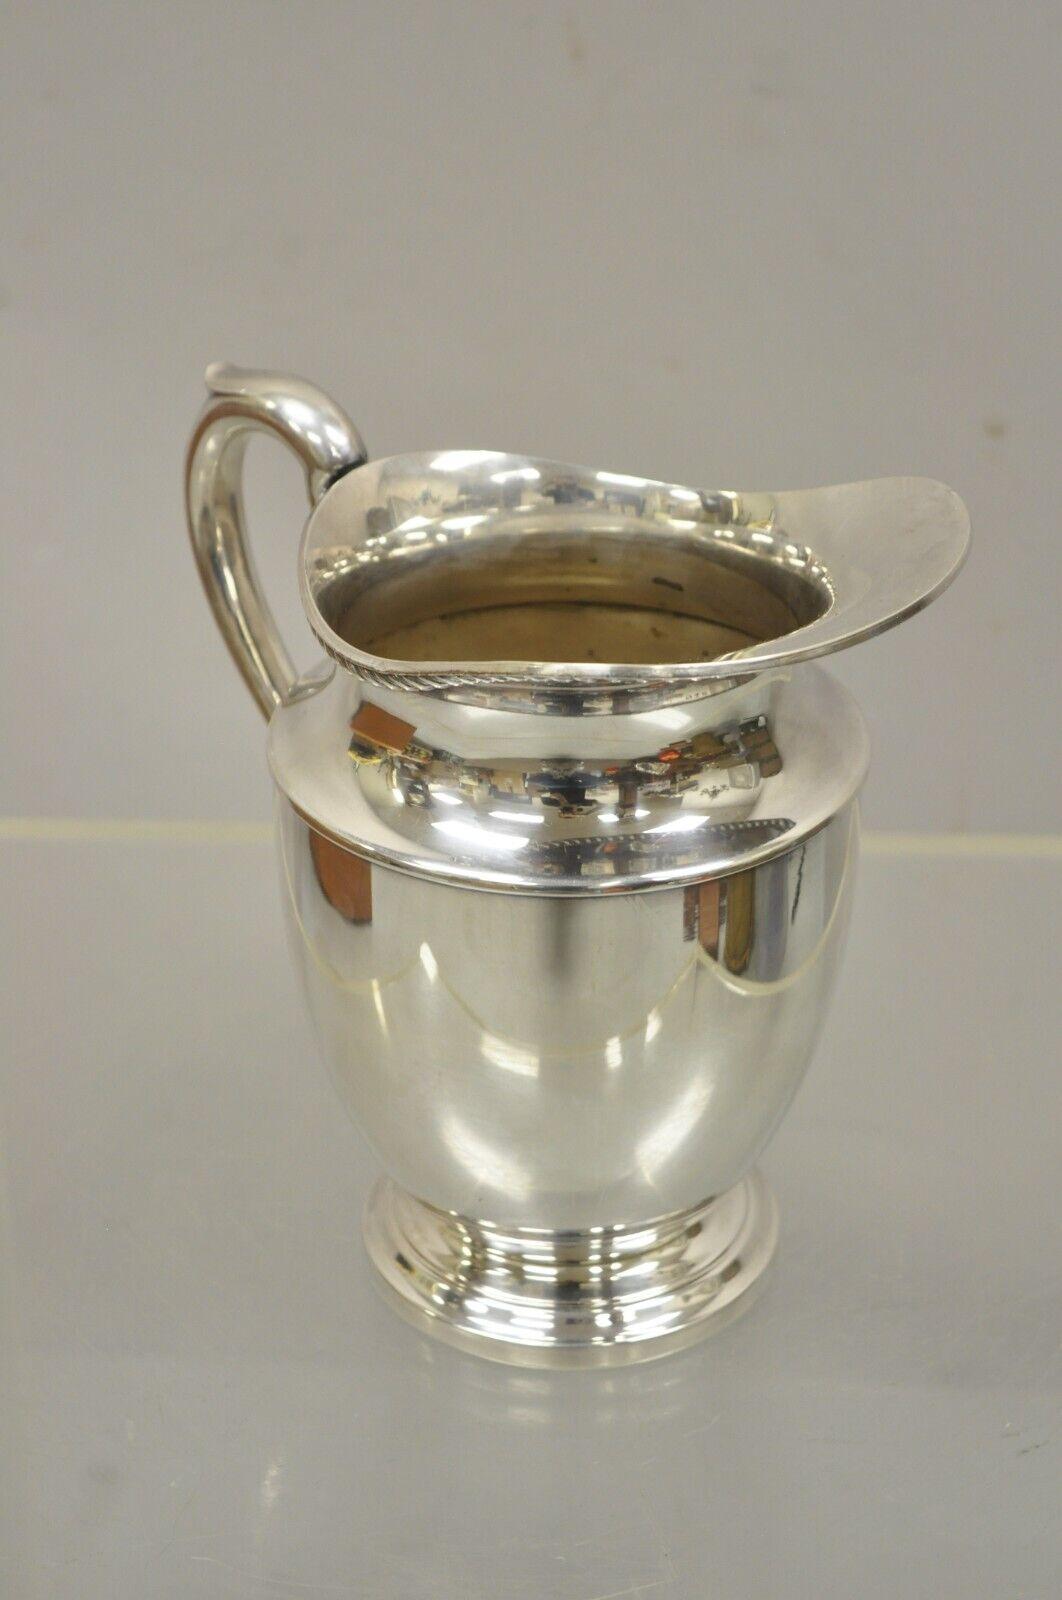 Vintage Art S. Co SPC 221 silver plated regency style water pitcher. Circa mid 20th century. Measurements: 8.25